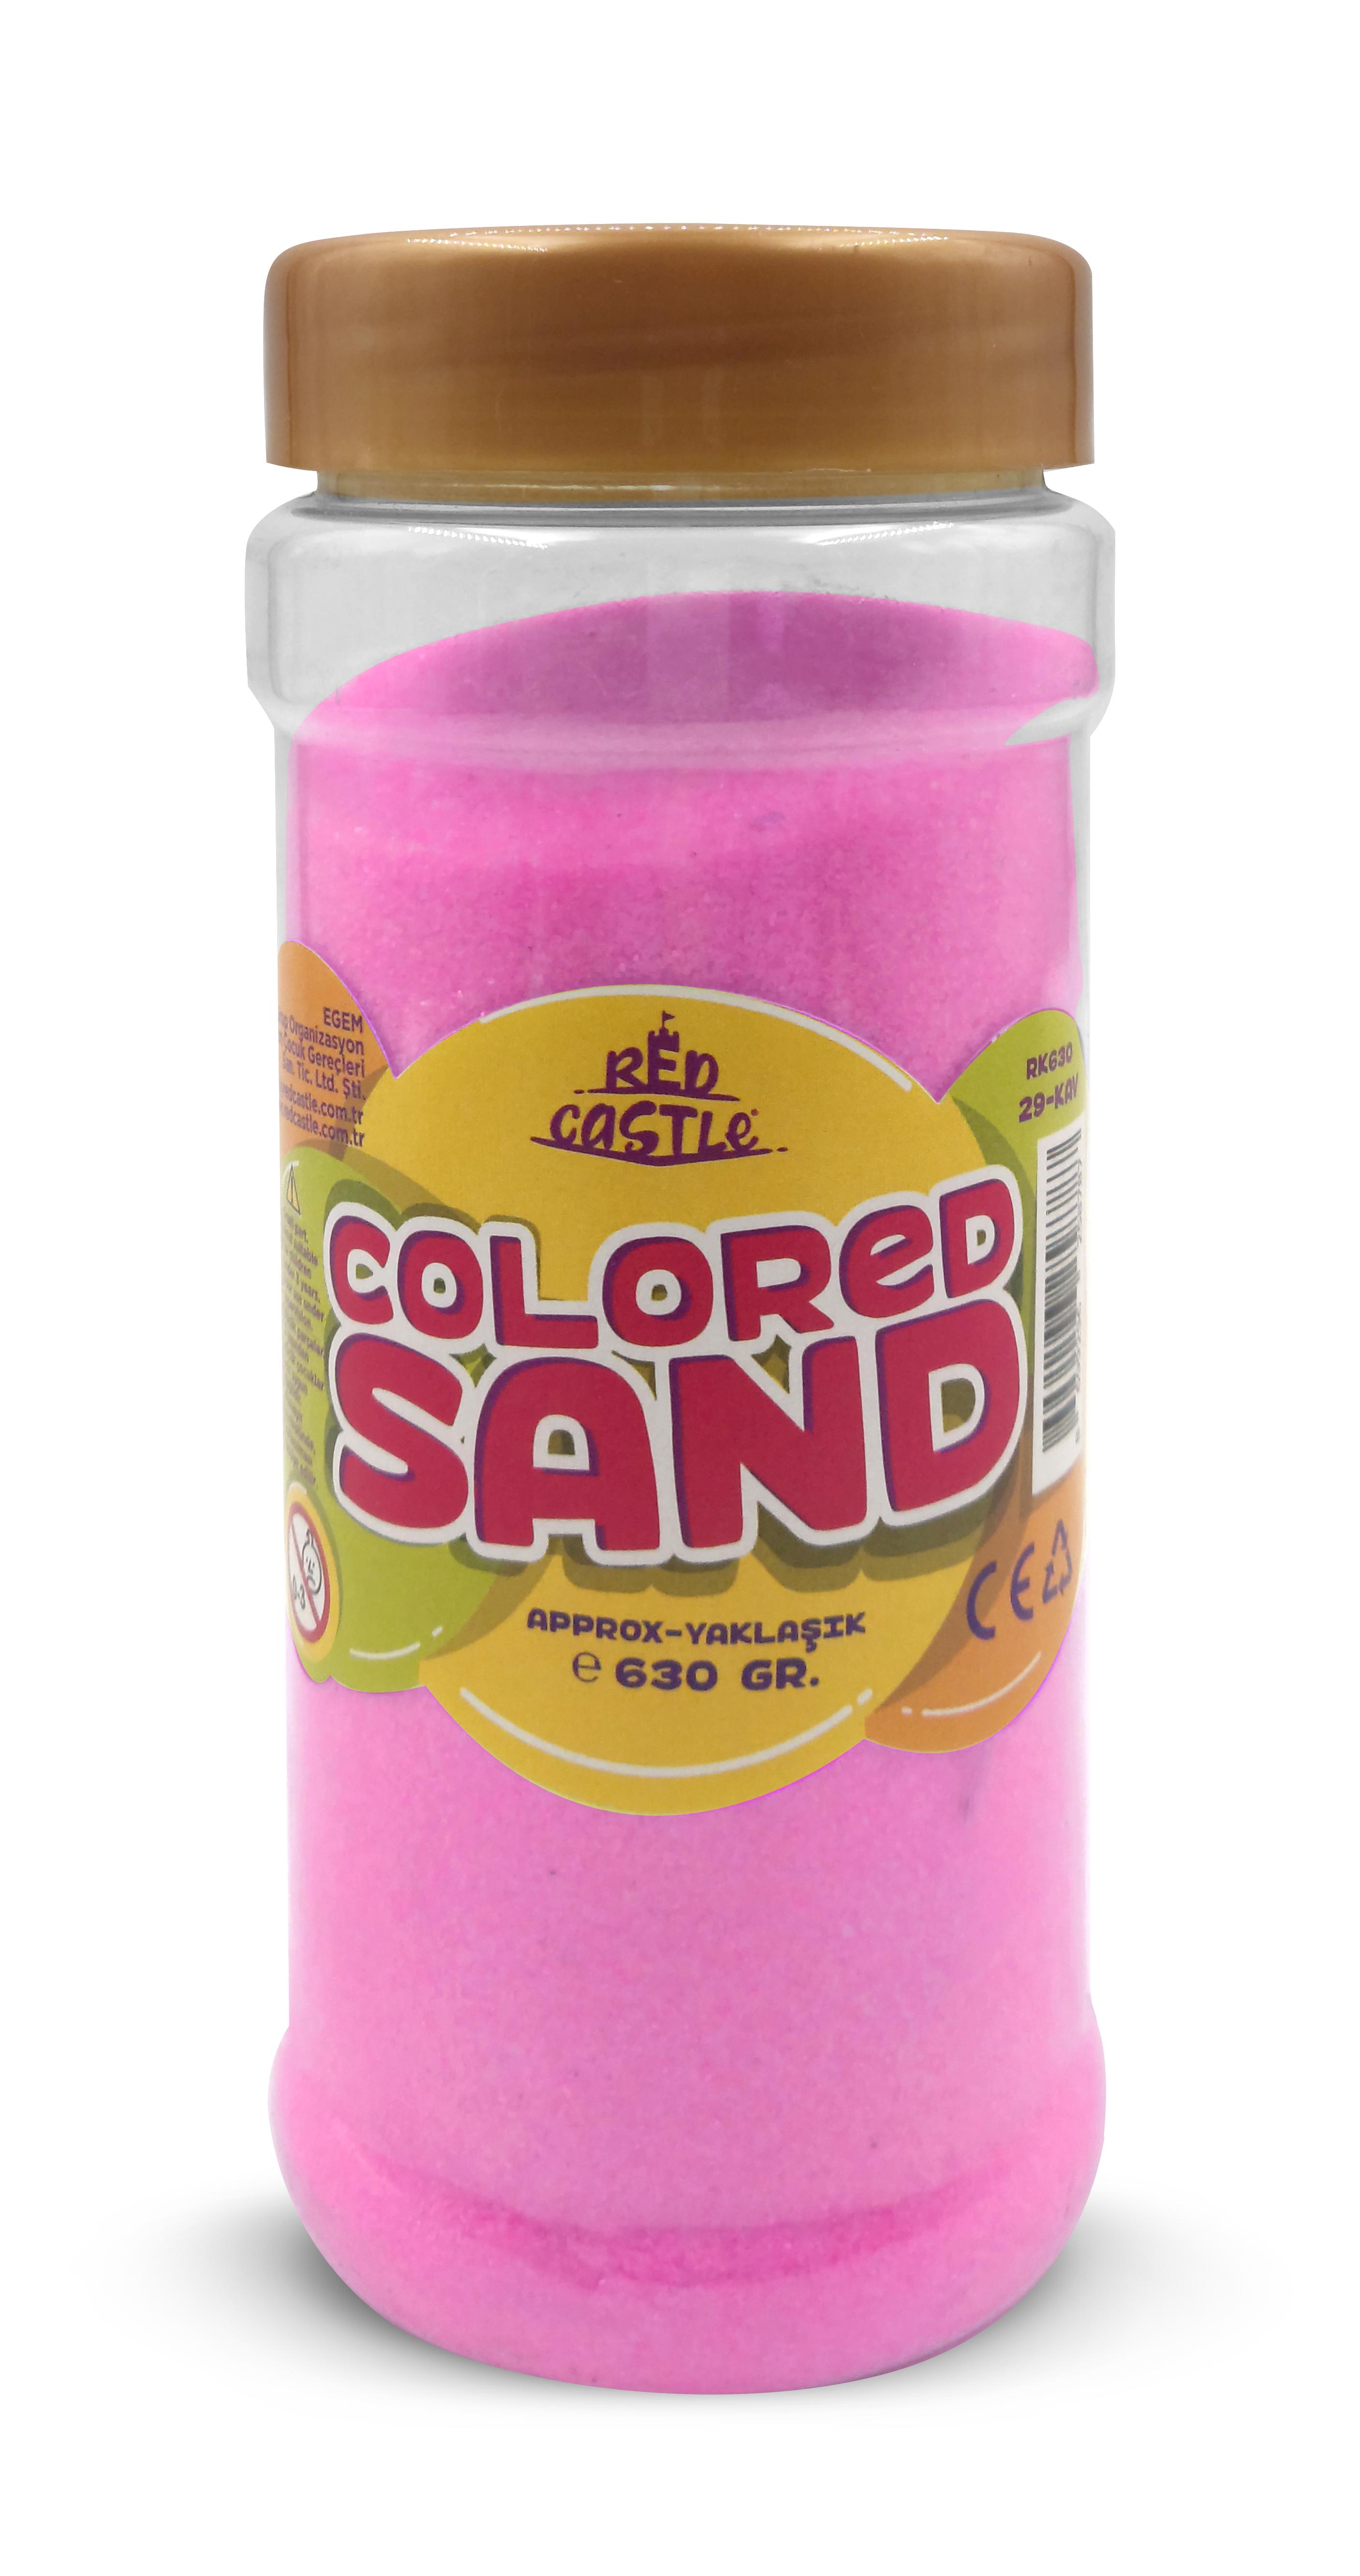 Colored Sand Painting Sand 630 grams-Red Castle RK630-21-KAV